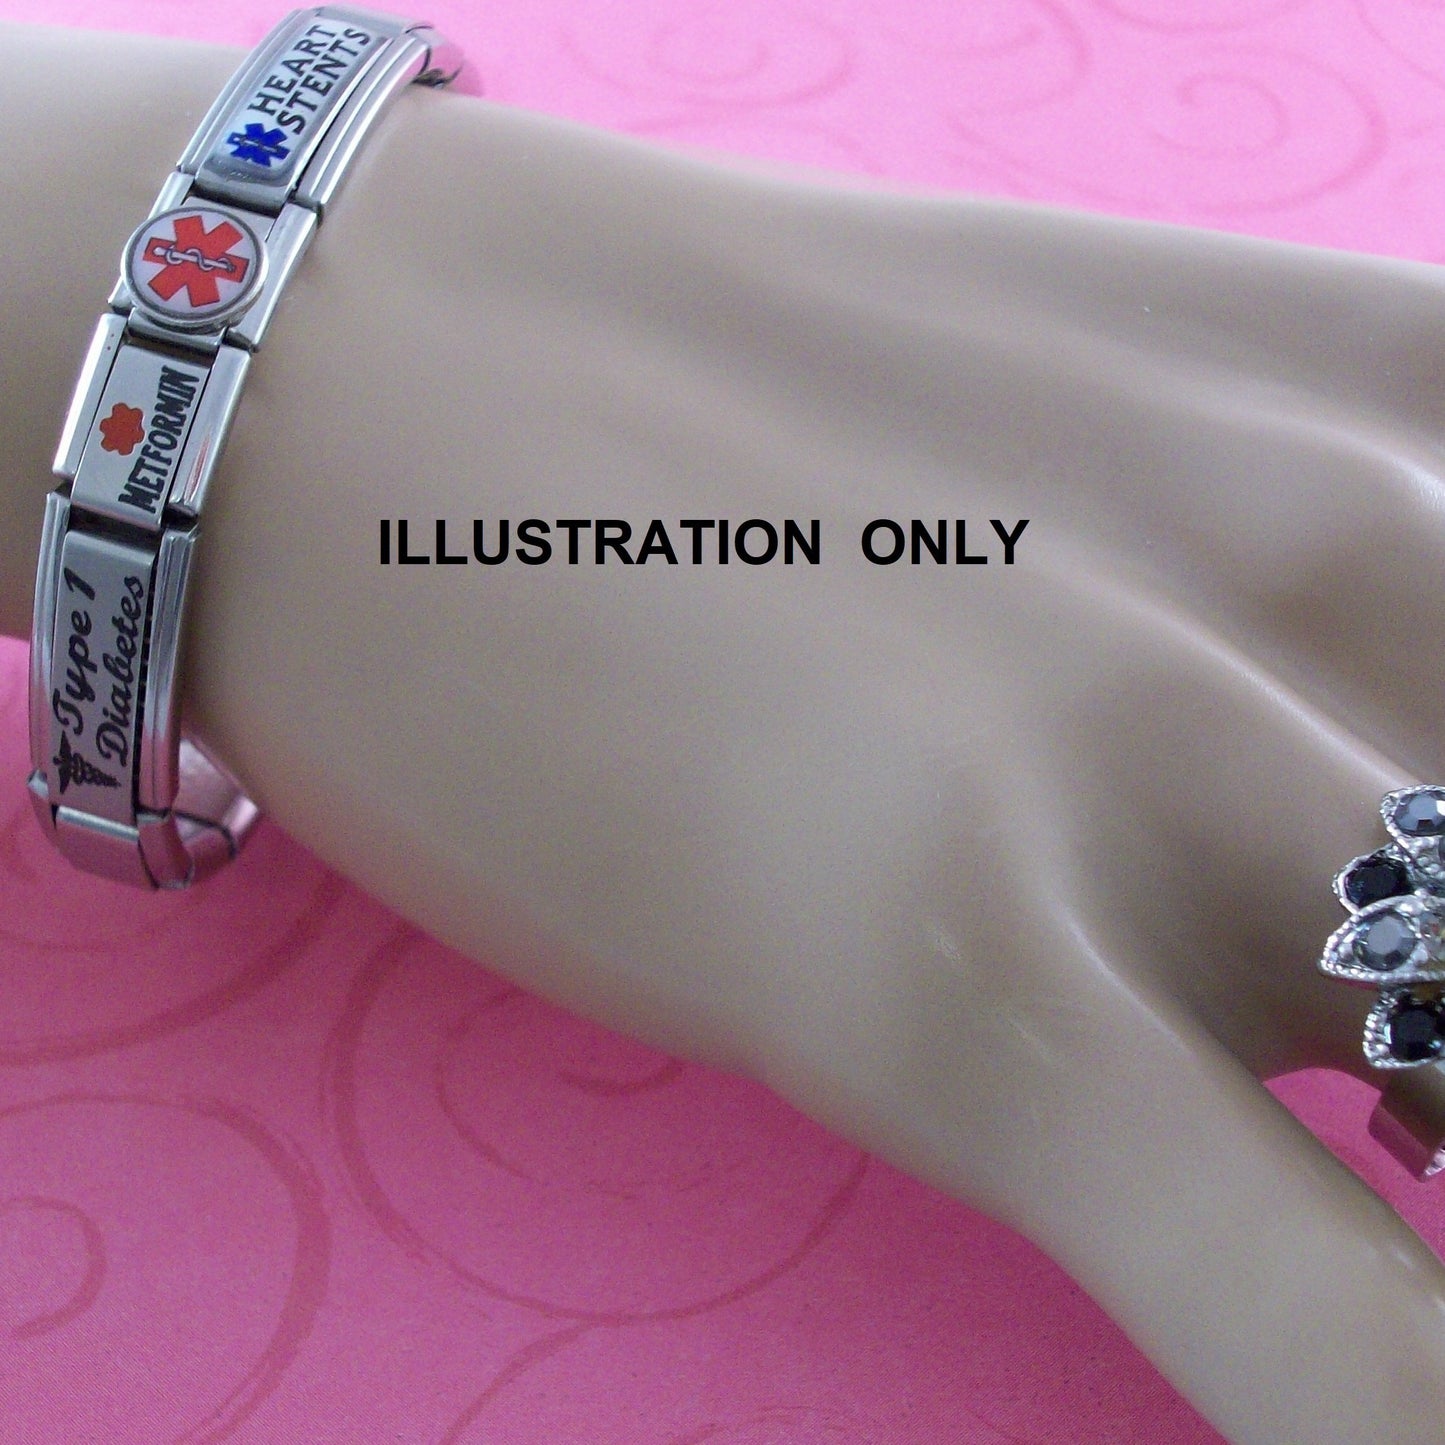 Breast Cancer Medical ID Alert Italian Charm Bracelet No Needle or Blood Pressure on RIGHT Arm by Gadow Jewelry